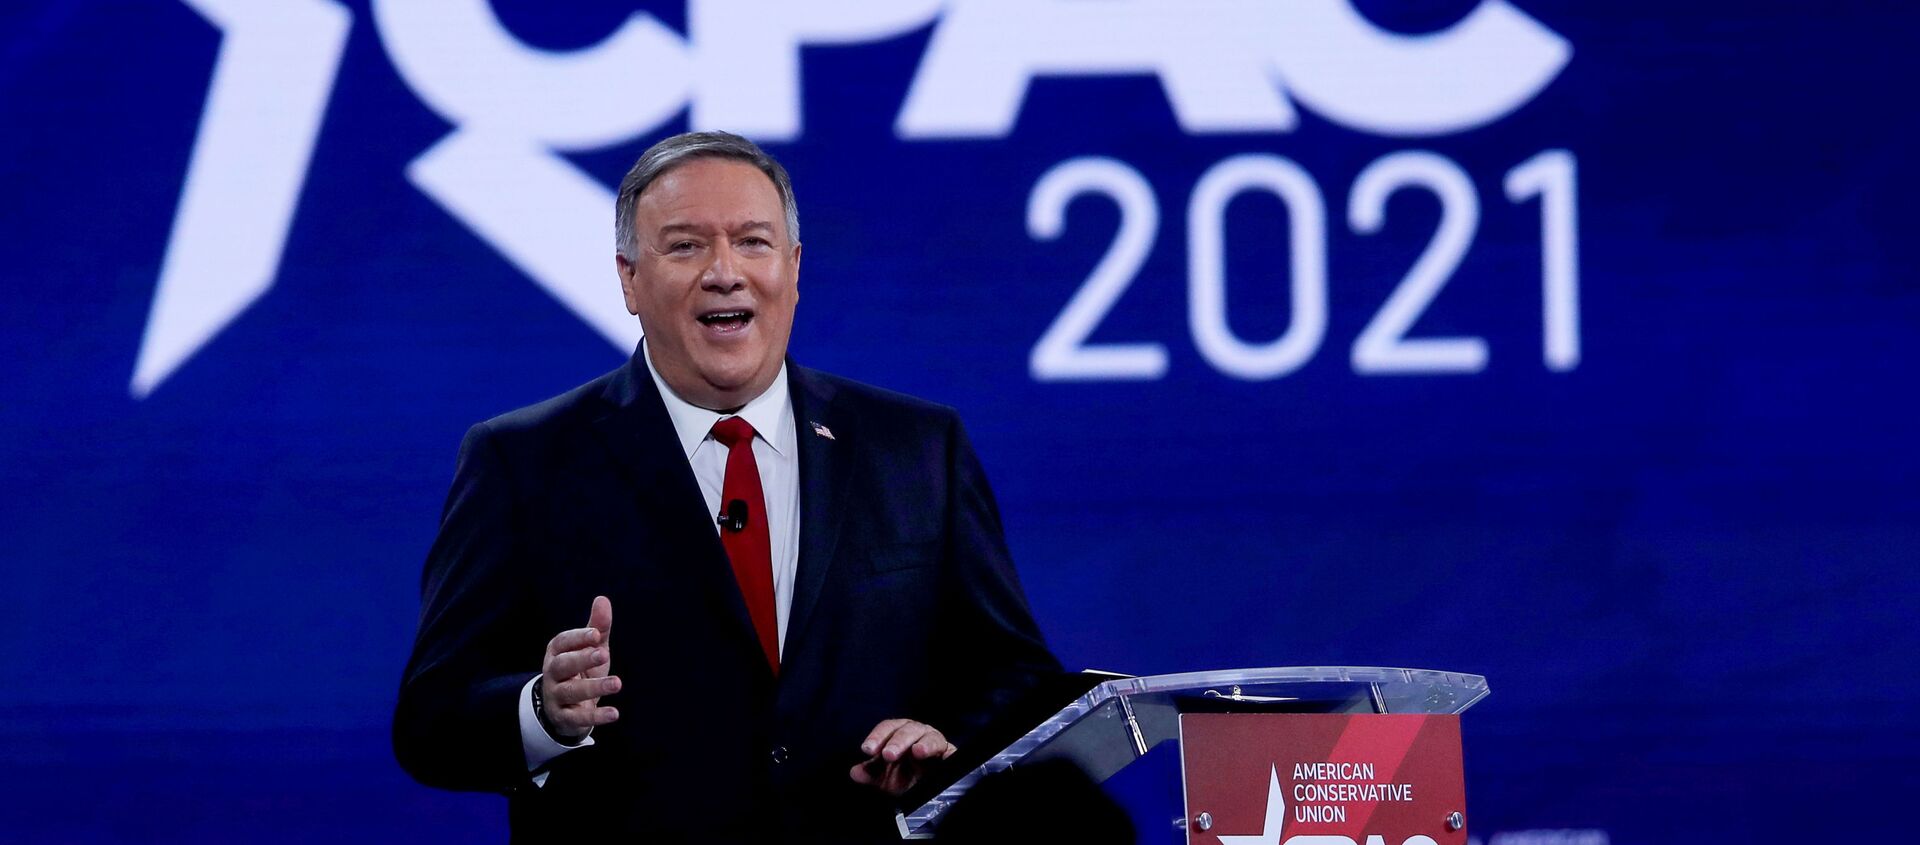 Former U.S. Secretary of State Mike Pompeo speaks at the Conservative Political Action Conference (CPAC) in Orlando, Florida, U.S. February 27, 2021 - Sputnik International, 1920, 28.02.2021